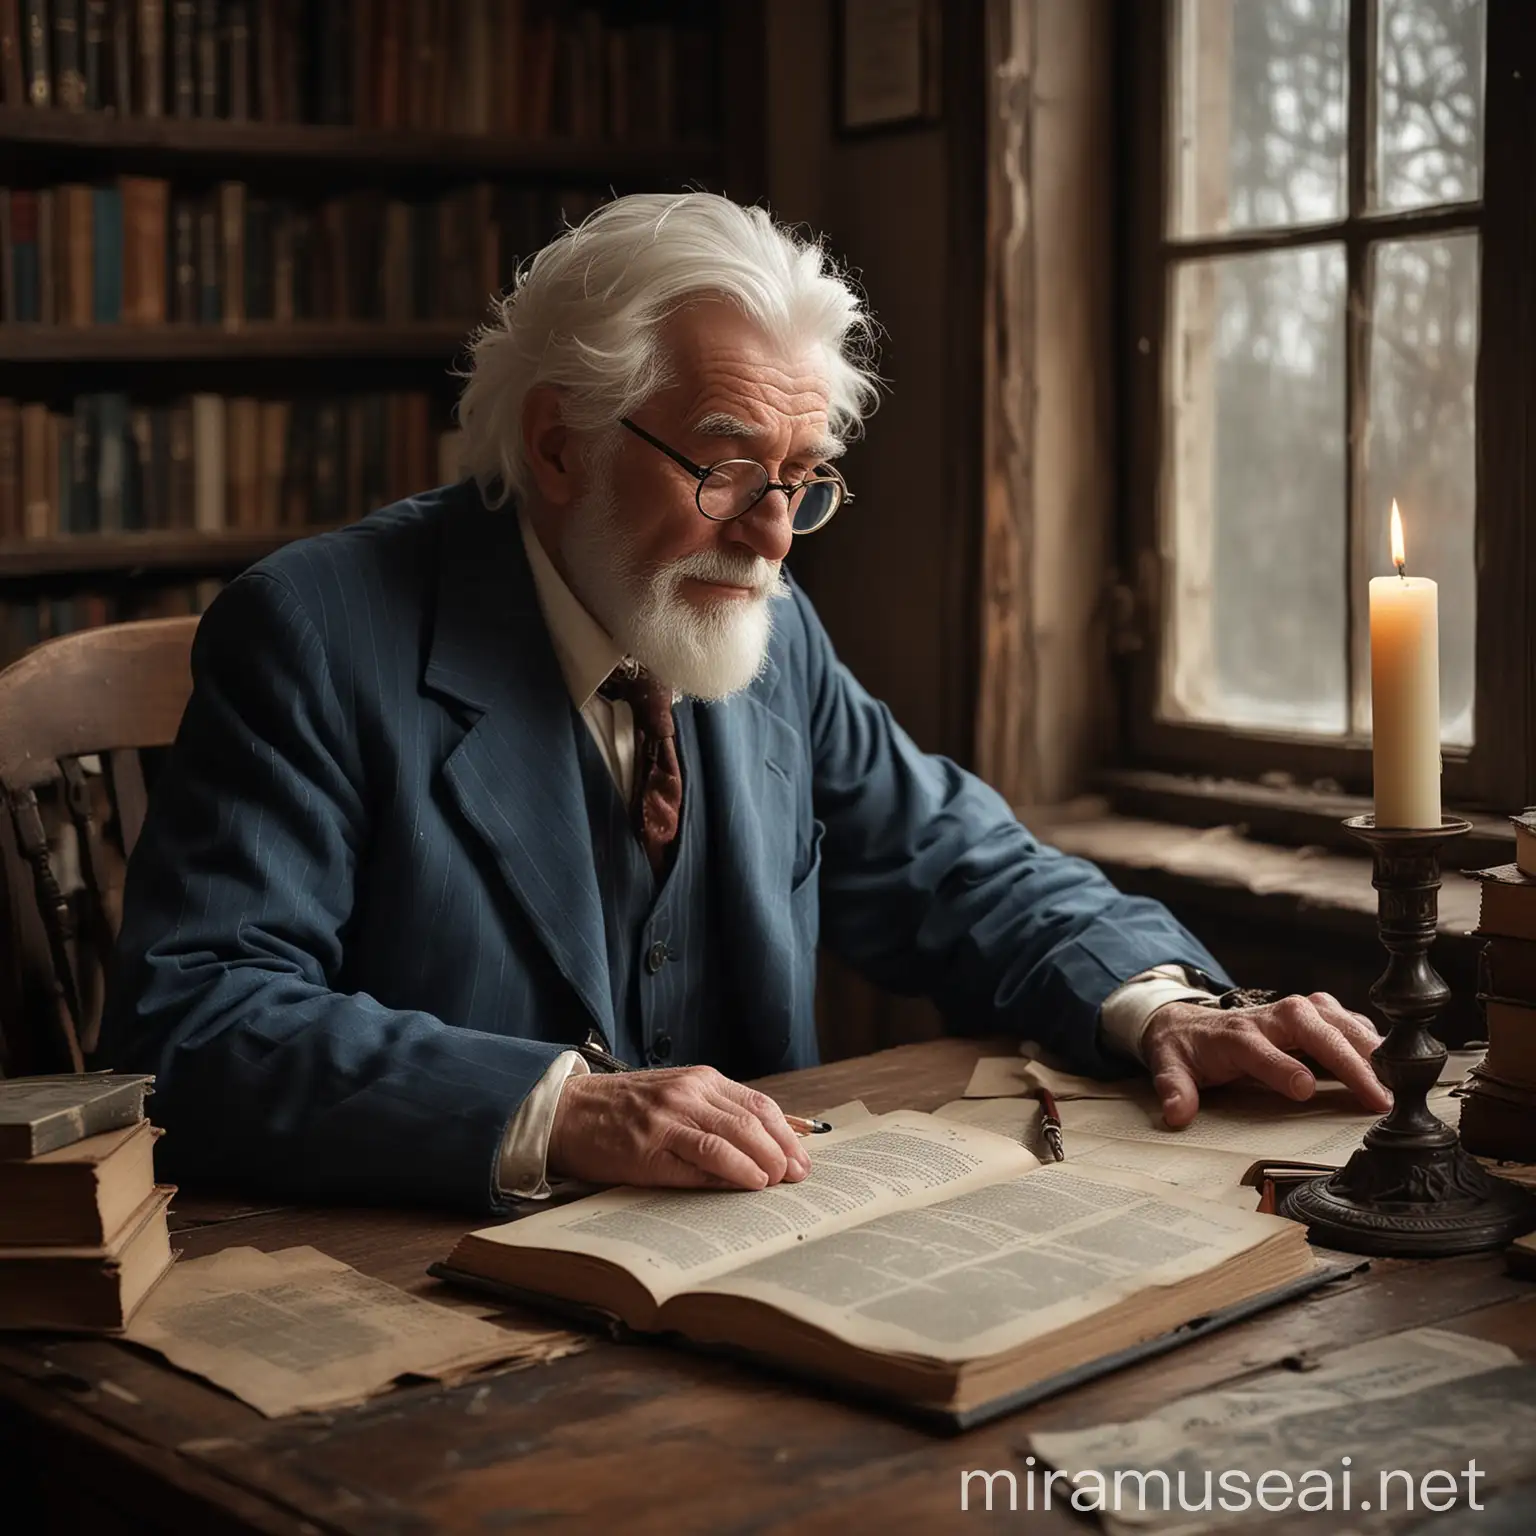 As the midday sun casts a warm glow through the window of his study, an elderly human man sits amidst the comforting embrace of his books and papers. His snow-white hair, neatly gathered, frames a face weathered by time, yet softened by the warmth of his azure eyes. Perched upon the bridge of his nose, a pair of spectacles rests, aiding him in his pursuit of knowledge.

Capture the man's dignified presence as he sits at his desk, clad in a crisp blue pinstripe suit that speaks of a bygone era. His hands, weathered yet steady, cradle an open tome, its pages filled with the wisdom of ages past. Despite the stillness of the room, there is a sense of quiet contemplation about him, as if he is lost in the labyrinth of his own thoughts.

Beside him, a solitary candle stands upon the desk, its flame extinguished, a silent sentinel to the passage of time. The faint scent of melted wax lingers in the air, mingling with the scent of aged paper and leather-bound books, creating an atmosphere of tranquil solitude.

Capture the essence of this elderly scholar as he immerses himself in the boundless realms of literature and learning, his thirst for knowledge undiminished by the years that have passed.